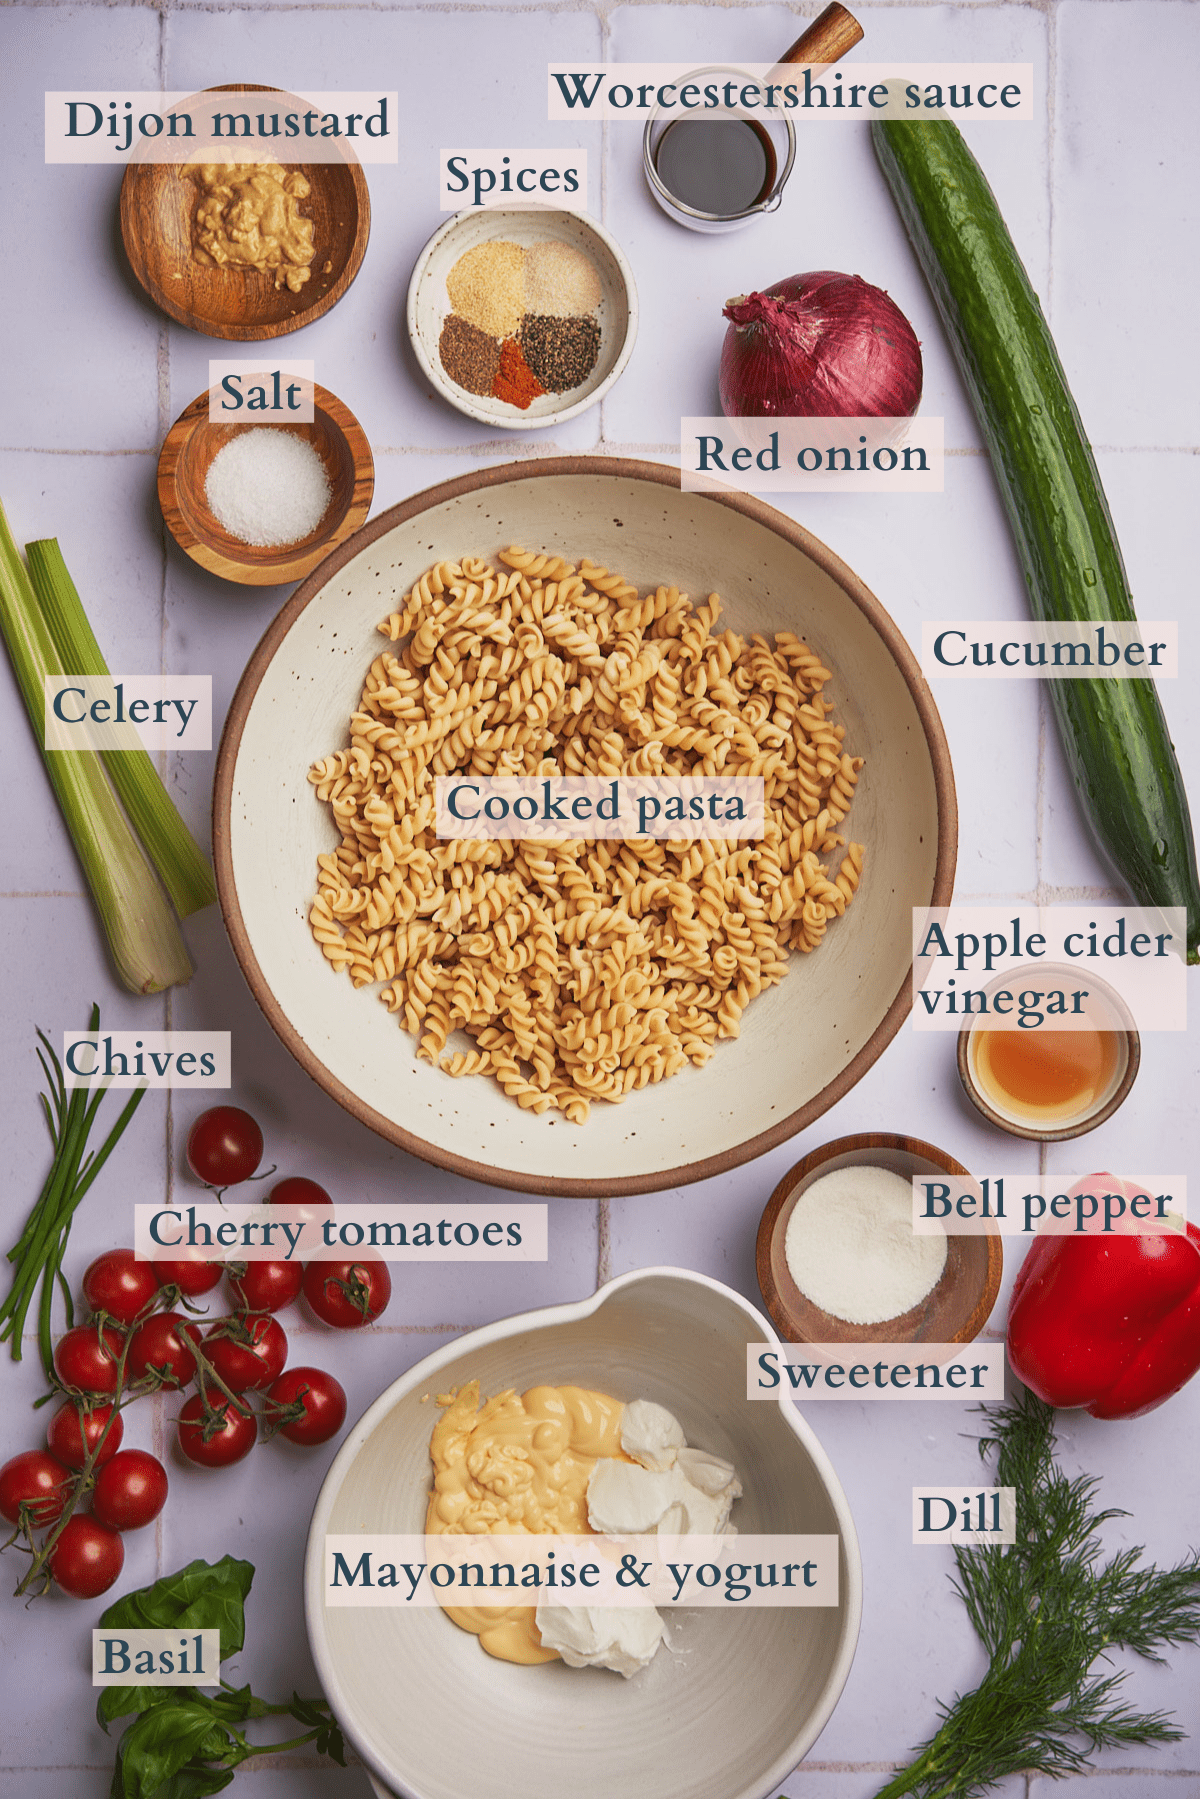 ingredients to make creamy pasta salad, with cucumbers, red onion, tomatoes, bell peppers, mayonnaise, greek yogurt, apple cider vinegar, sweetener, red bell peppers, celery, salt, spices, worcestershire sauce, dijon mustard, basil, dill, and chives.